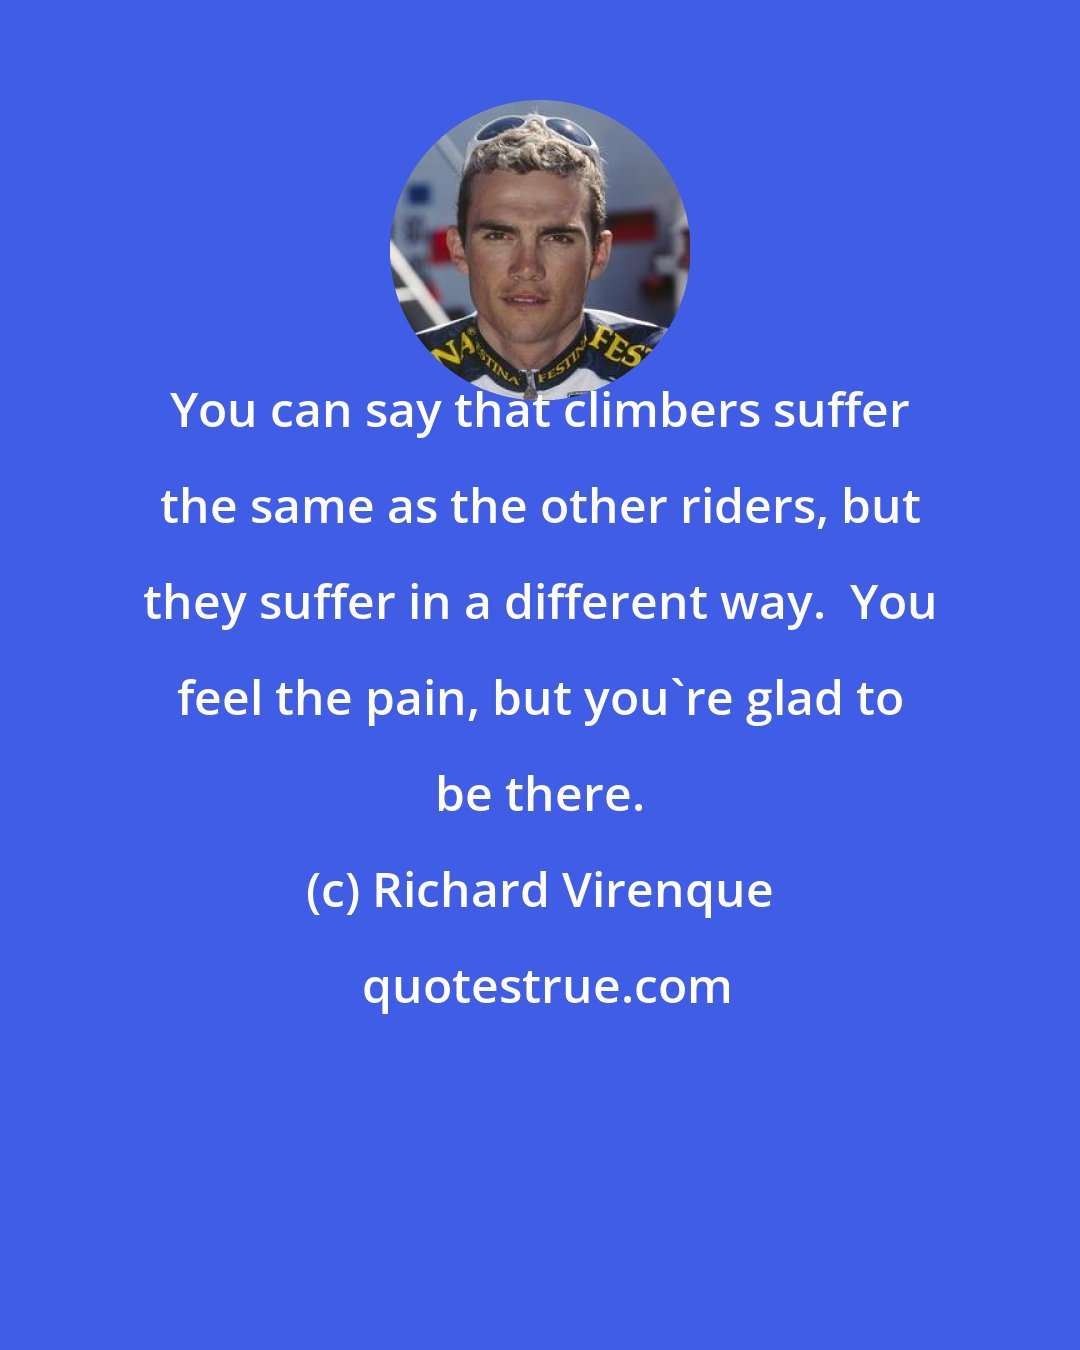 Richard Virenque: You can say that climbers suffer the same as the other riders, but they suffer in a different way.  You feel the pain, but you're glad to be there.